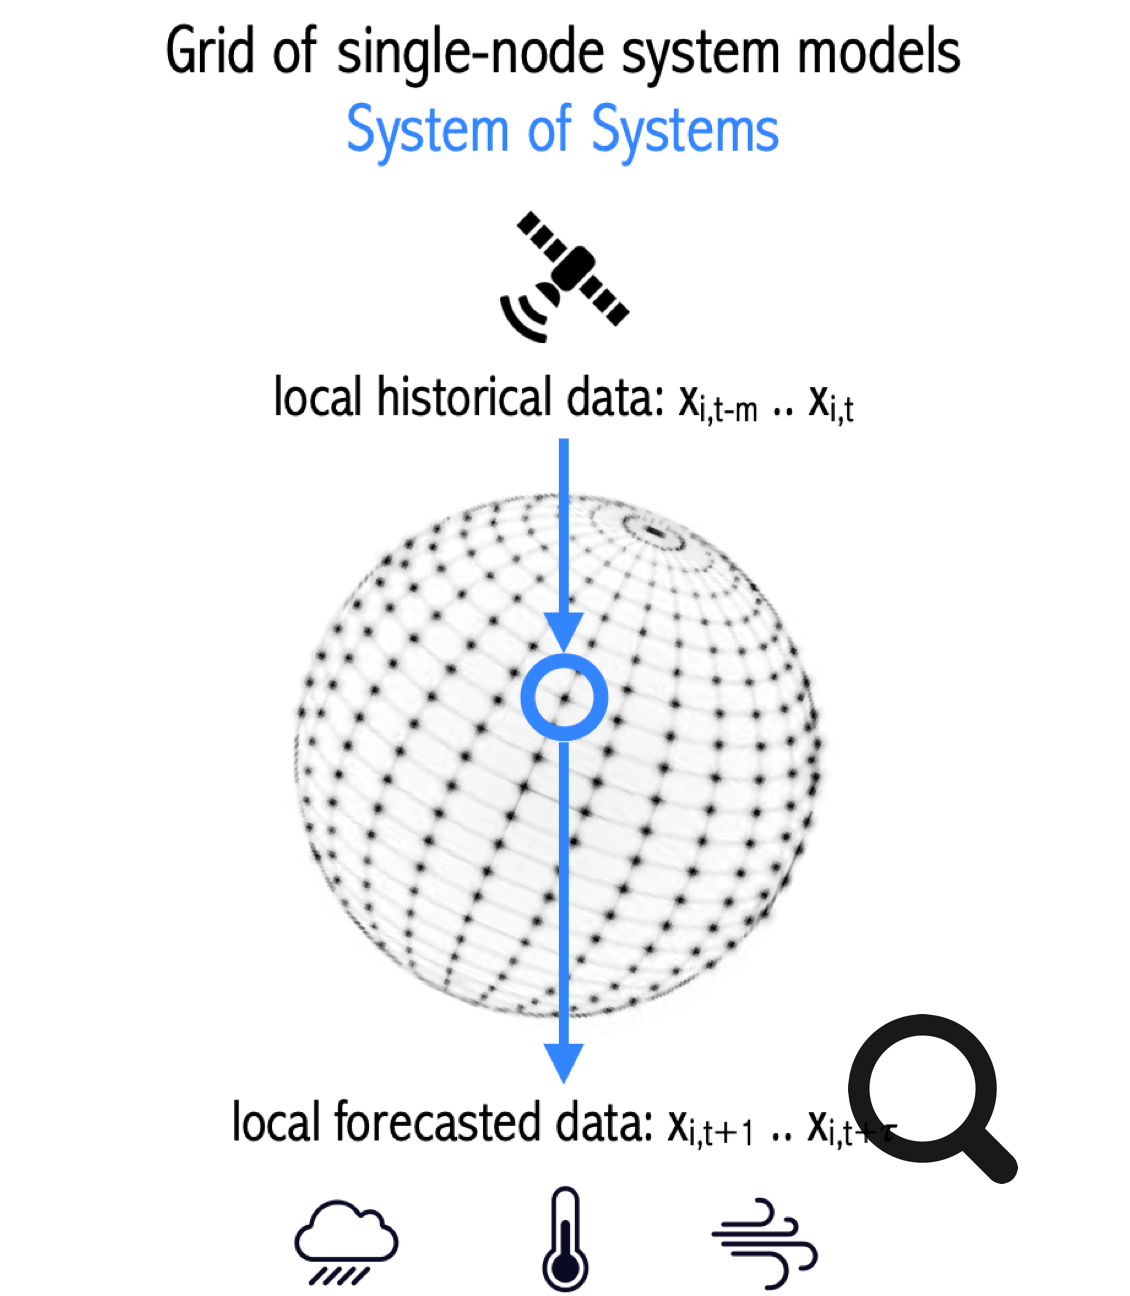 CLIMFOR- a gridded system of system of self-organized models for local environmental forecasting